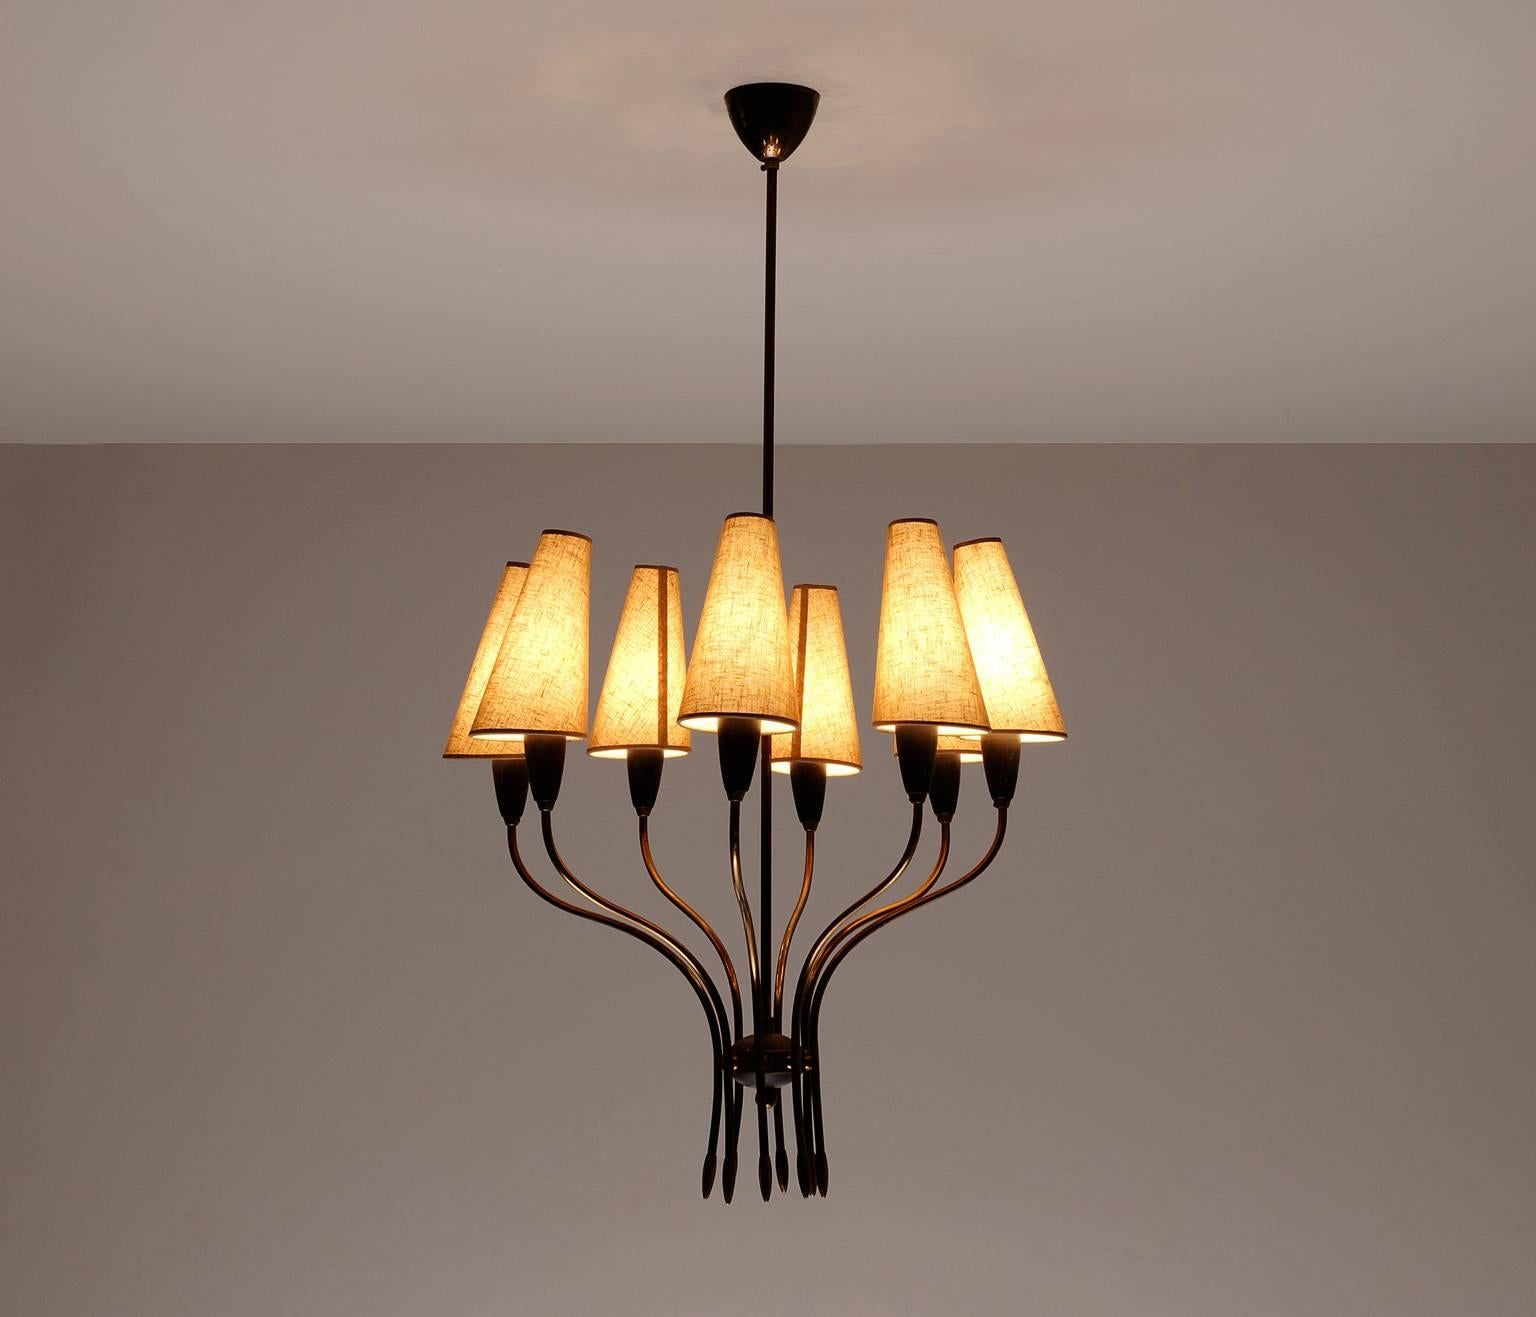 Stunning chandelier in brass with decorative shades and details, France, 1950s.

The eight shades provide a soft light which also gives this chandelier an elegant expression. French made with care as seen in some details as organic shapes. The stem